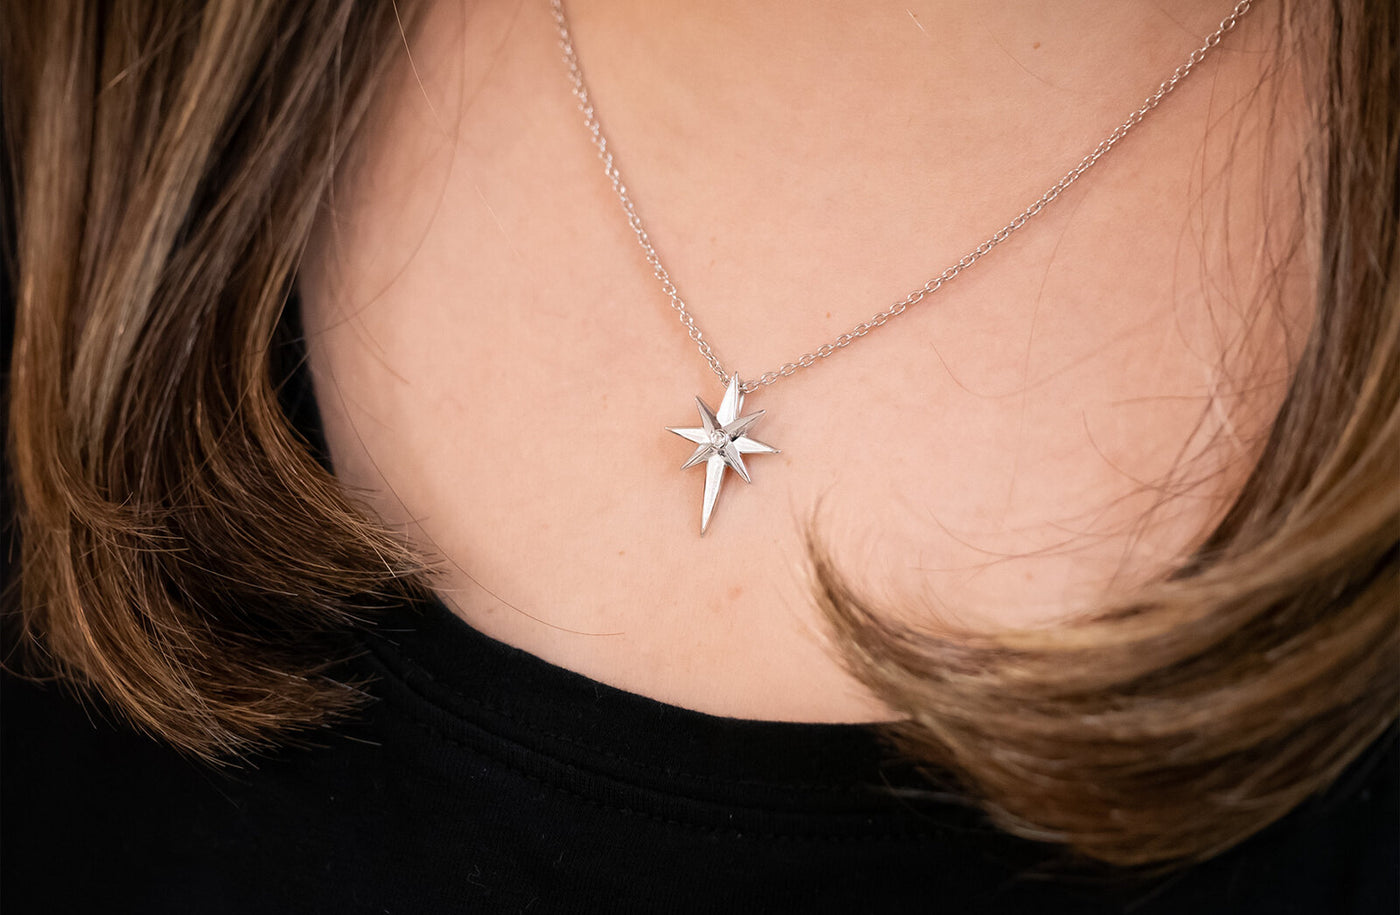 Northern Star Enamel Pendant with White Sapphire